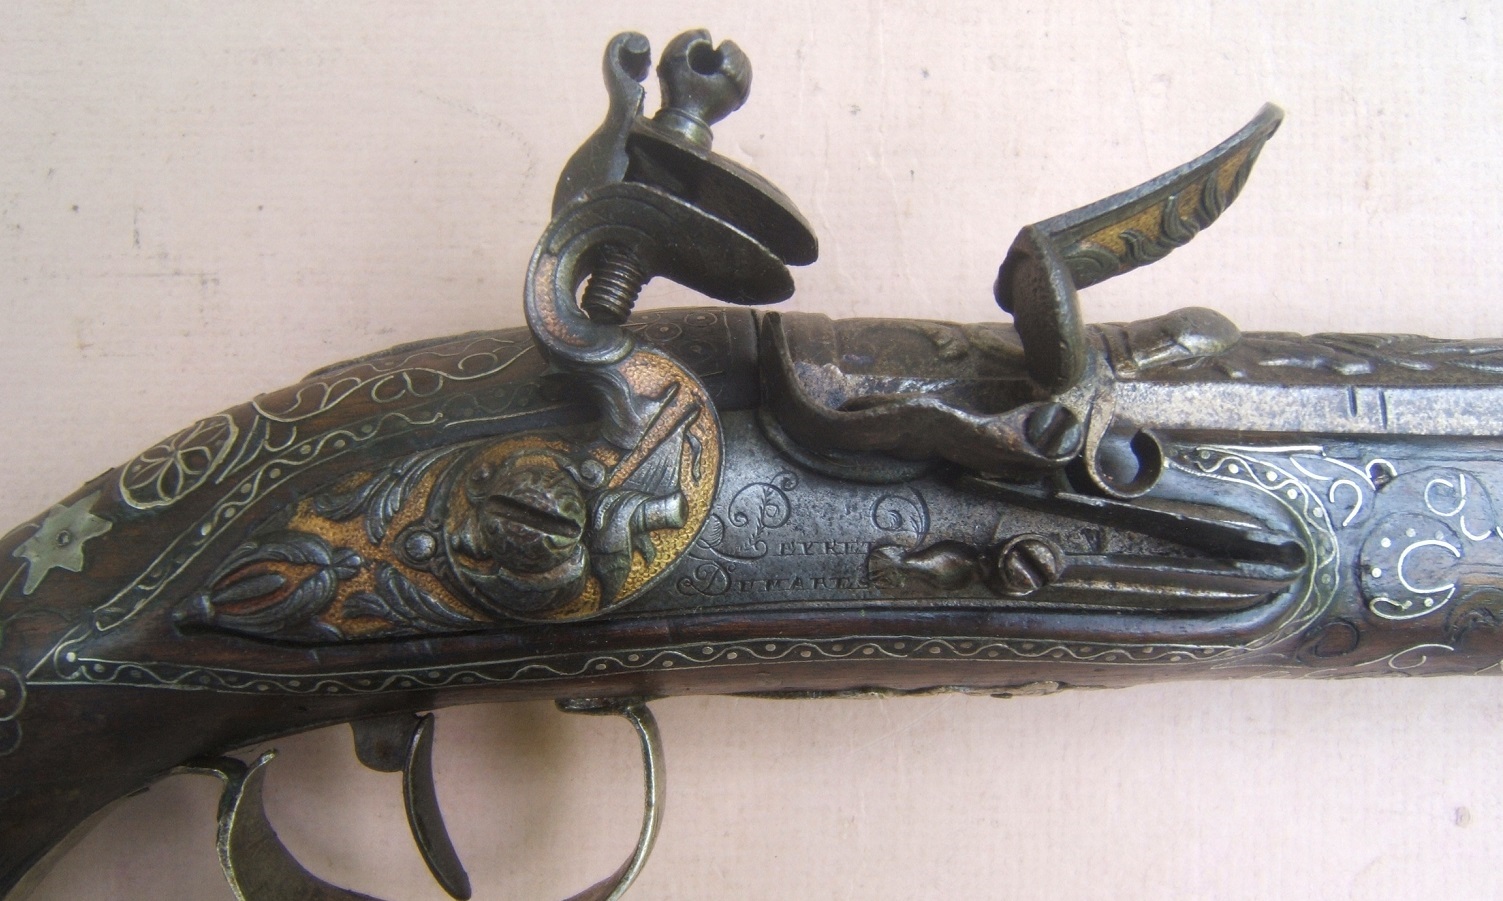 A VERY FINE QUALITY FRENCH SILVER MOUNTED & GOLD DAMASCENED FLINTLOCK HOLSTER PISTOL, by “PEYRTE DUMAREST” (FOR EASTERN/TURKISH MARKET, ca. 1780 view3